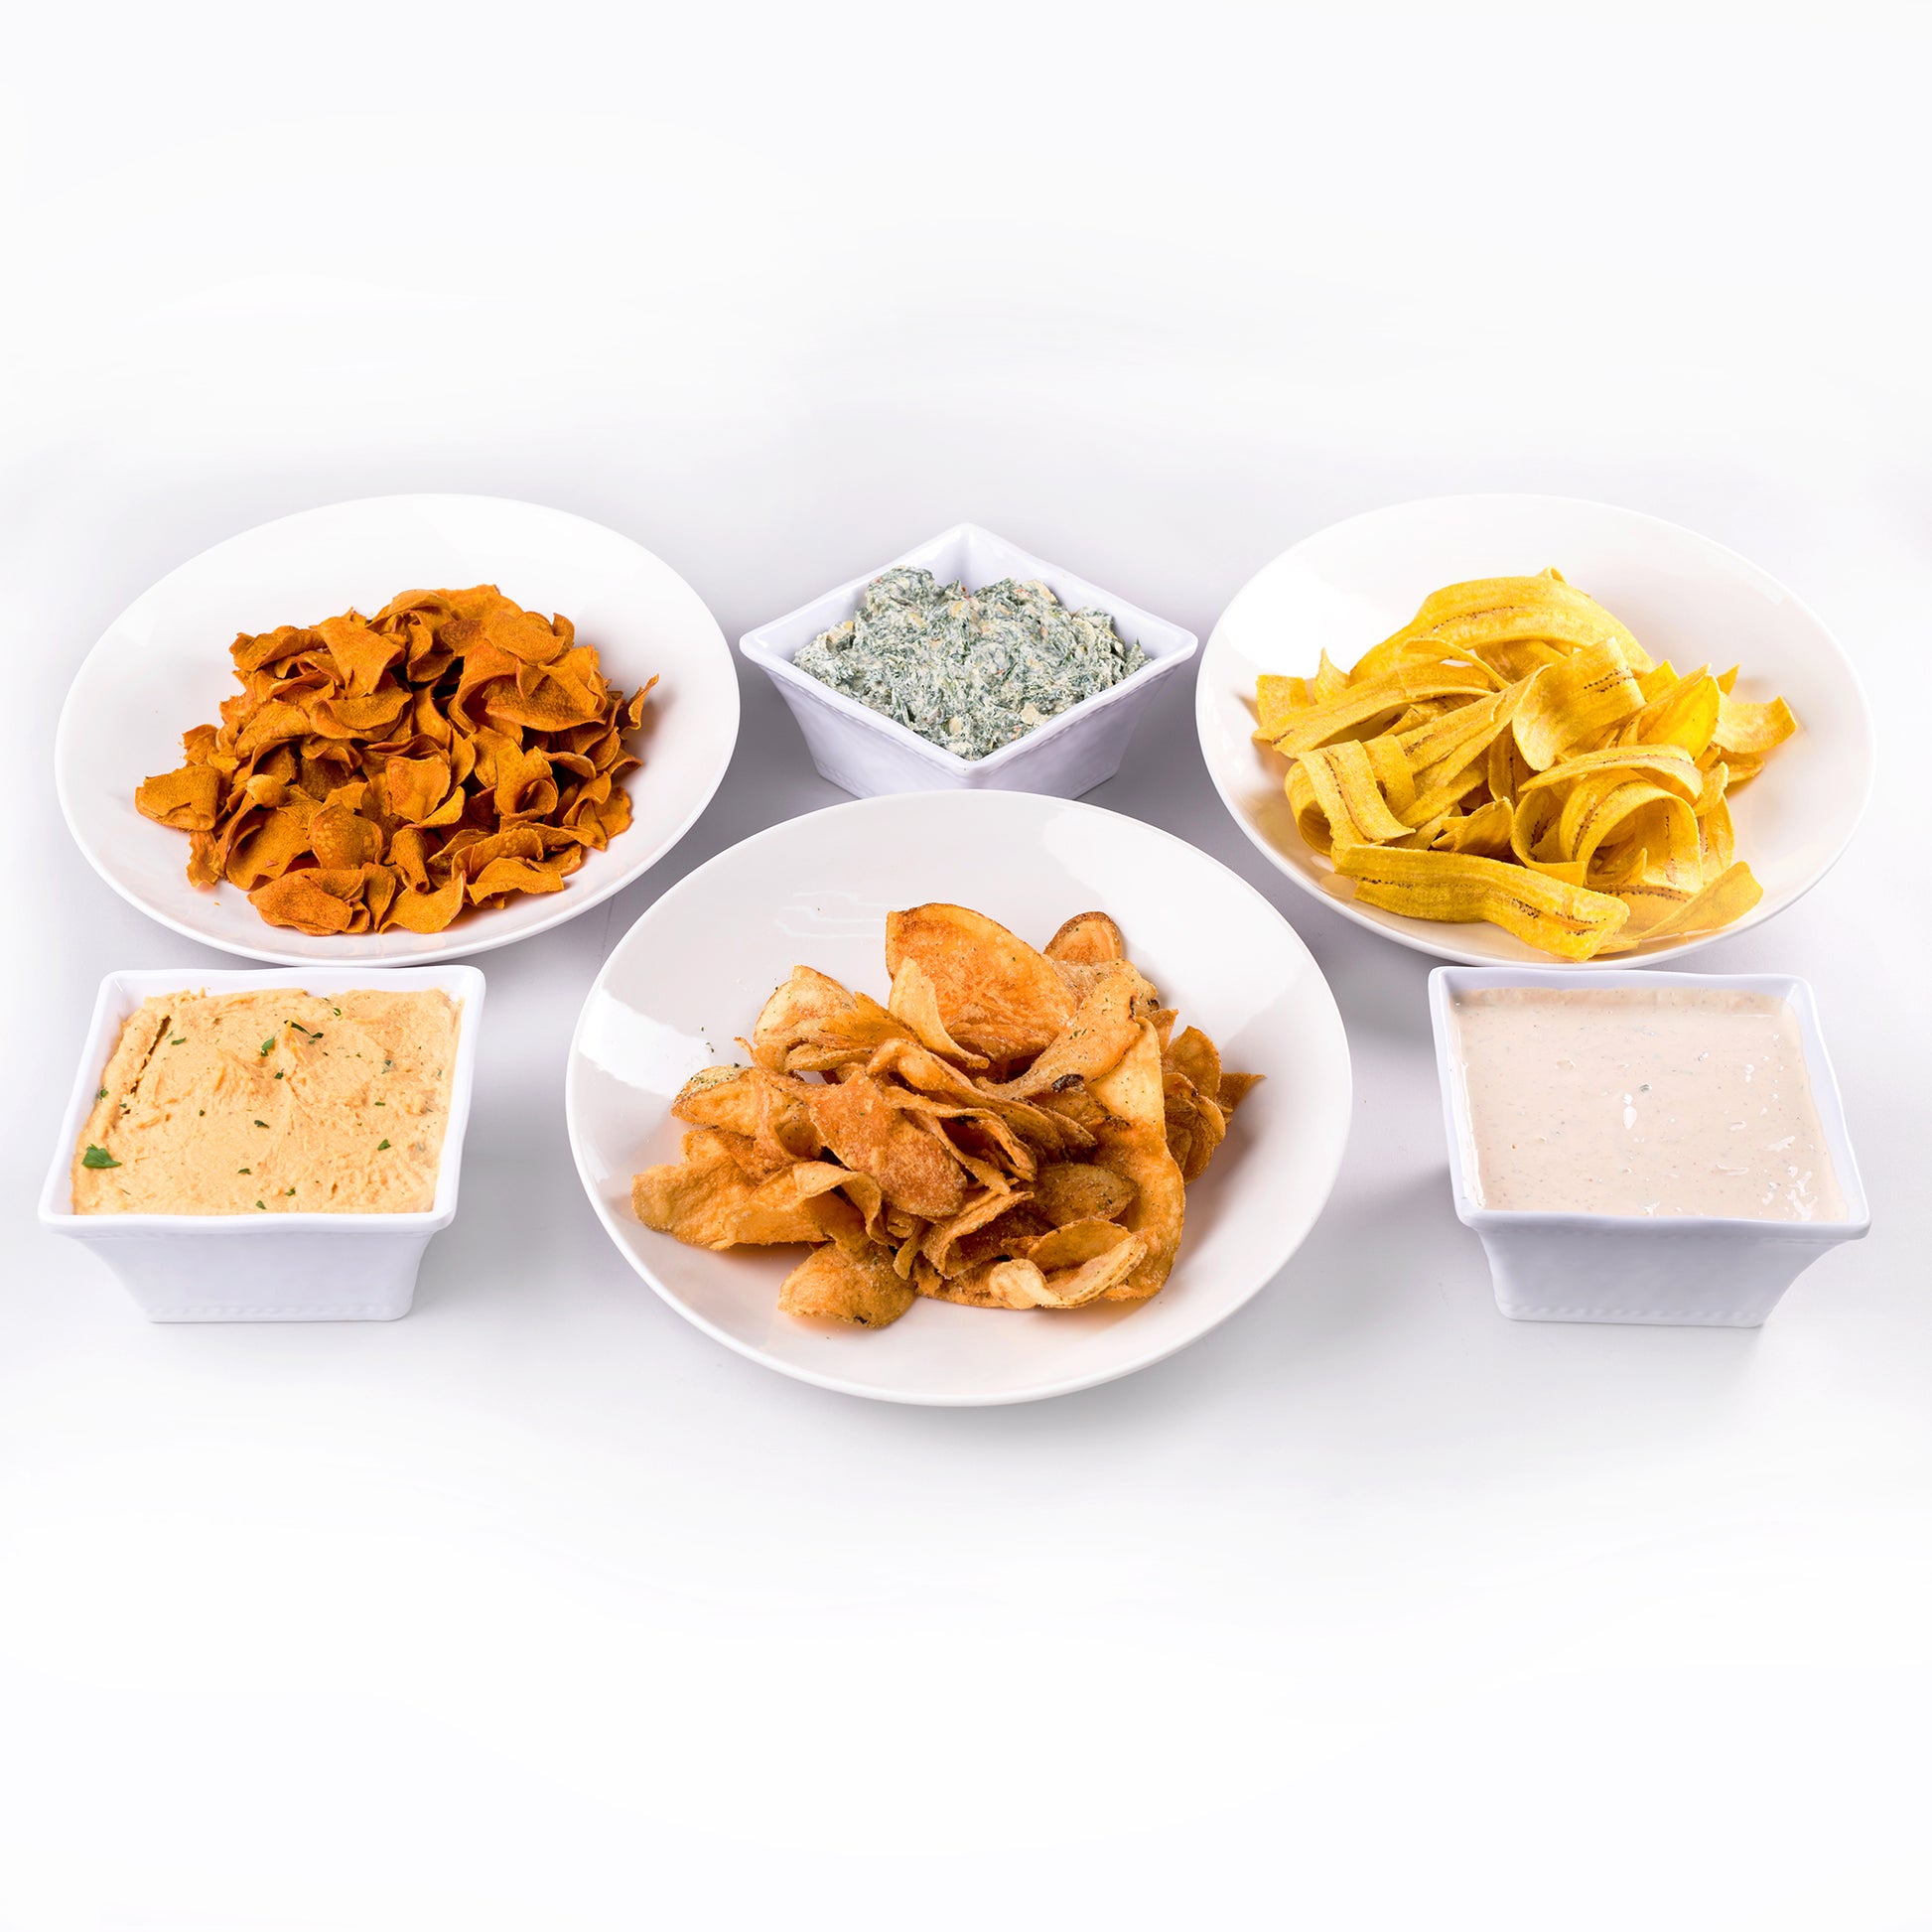 CHIPS AND DIPS PARTY PLATTER Meal Delivery Orlando Crunchy Chips 